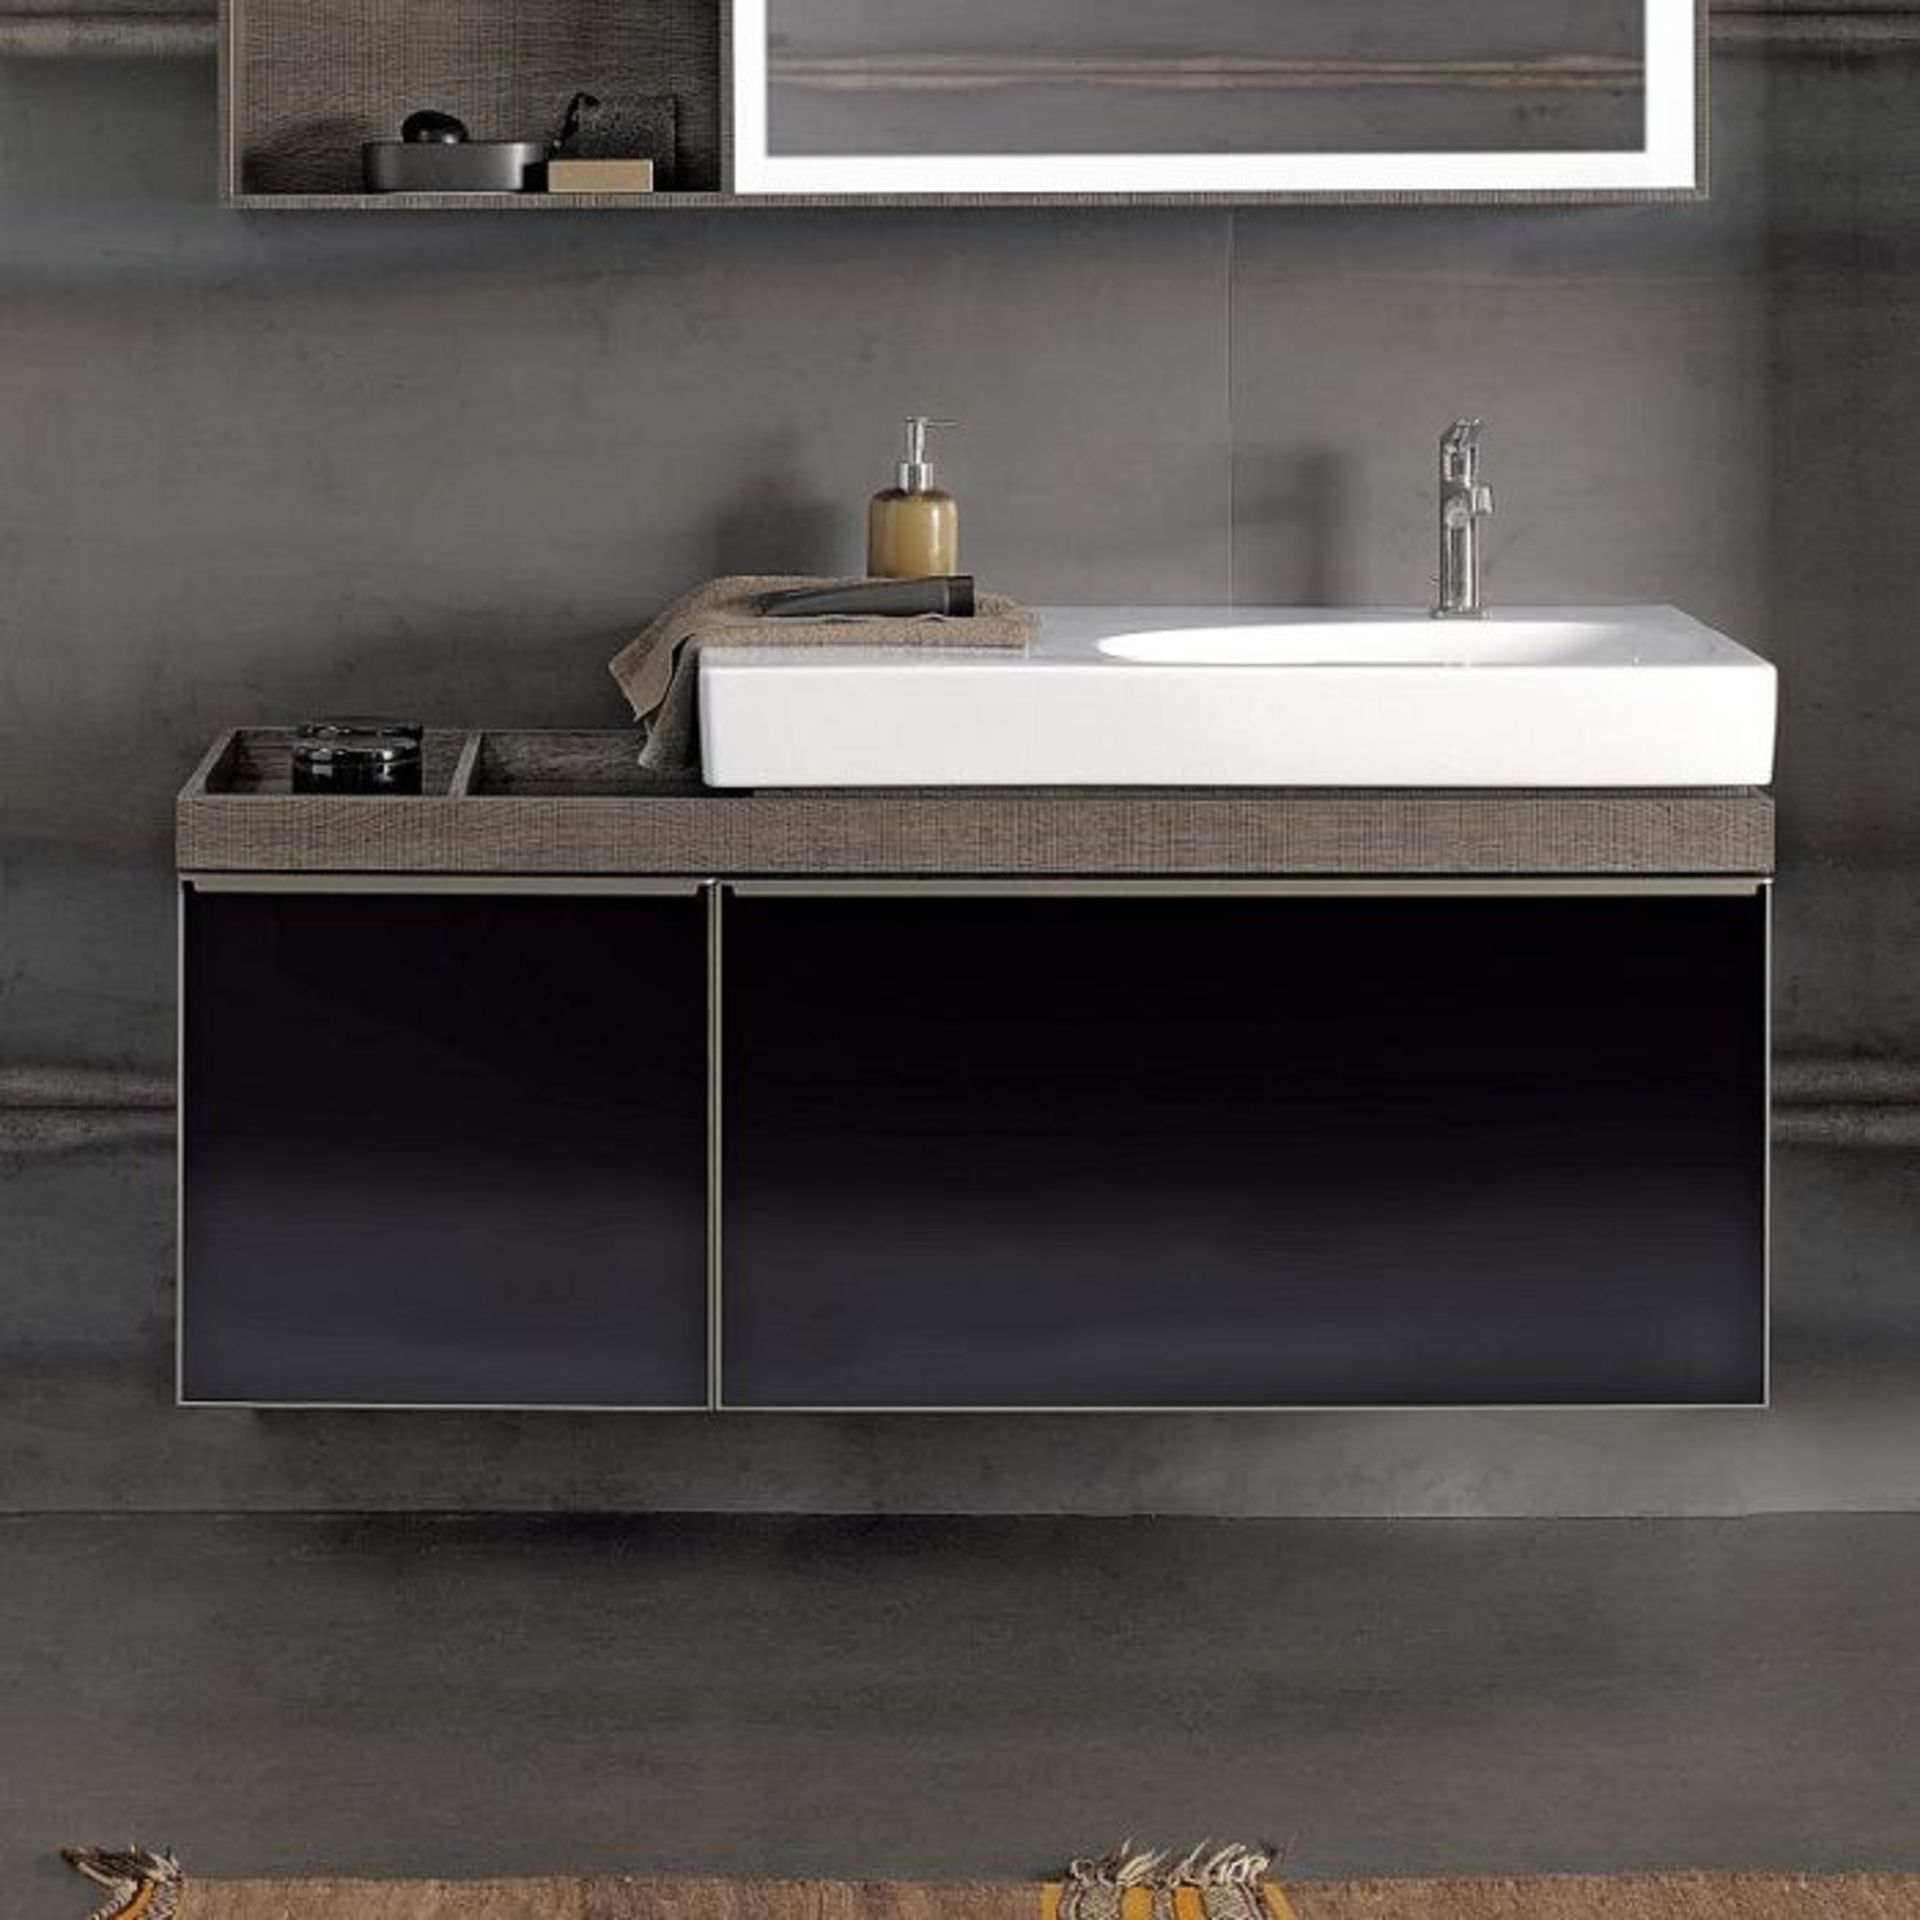 (VD5) Keramag Citterio 1184mm Grey/Brown Vanity Unit with Shelves. RRP £1,897.99. Comes comple...